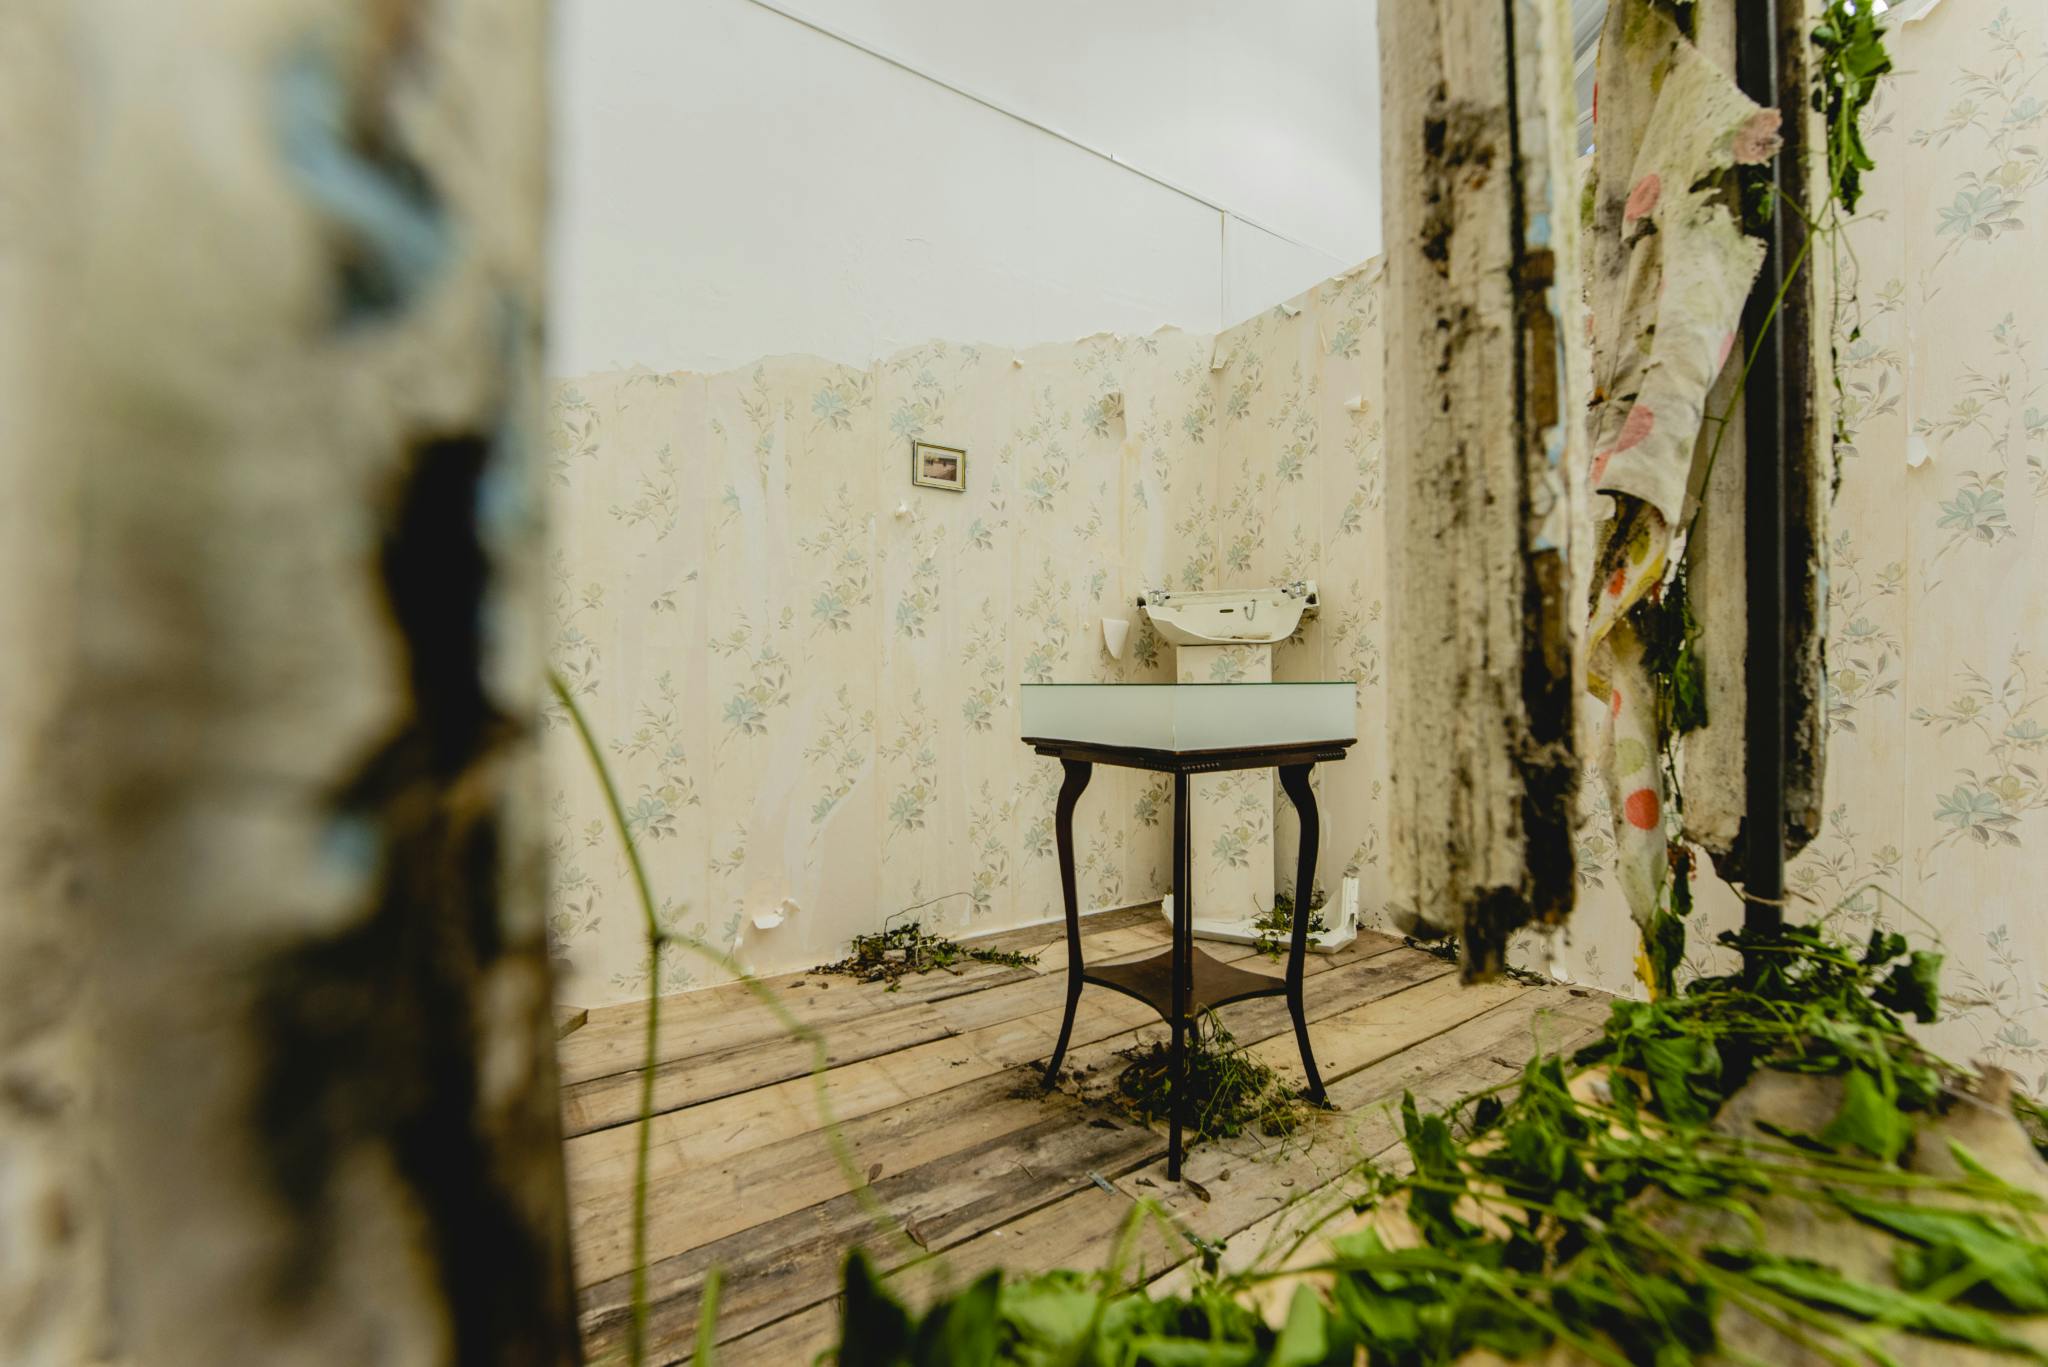 Image is taken through a rotting window frame covered in foliage, and looks at an installation featuring a glass box in the middle and peeling wallpaper and a broken ceramic sink in the background